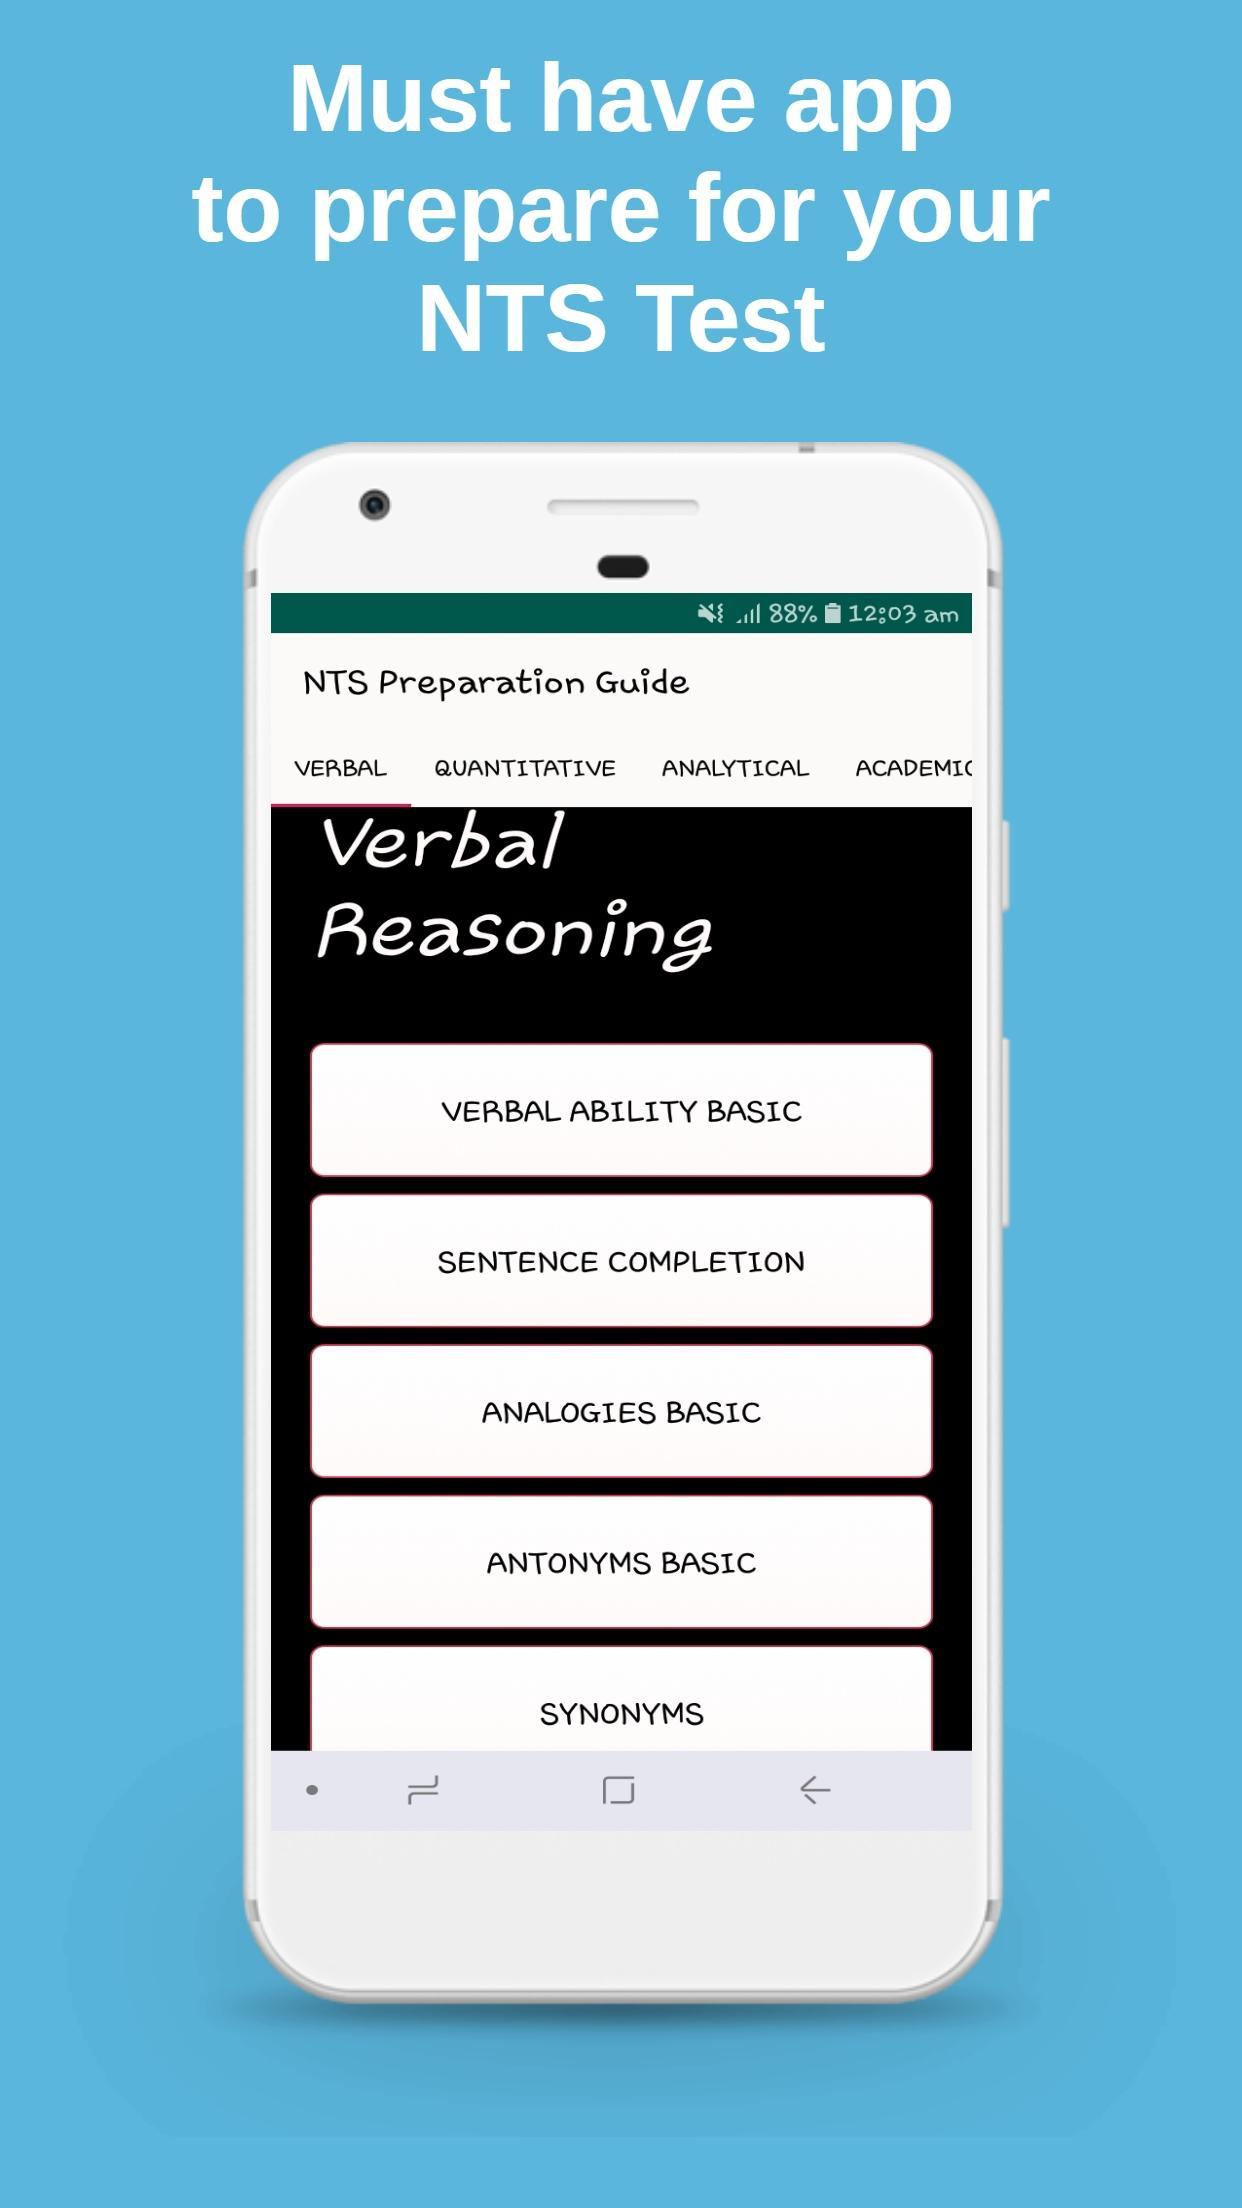 nts-preparation-guide-national-aptitude-test-apk-for-android-download